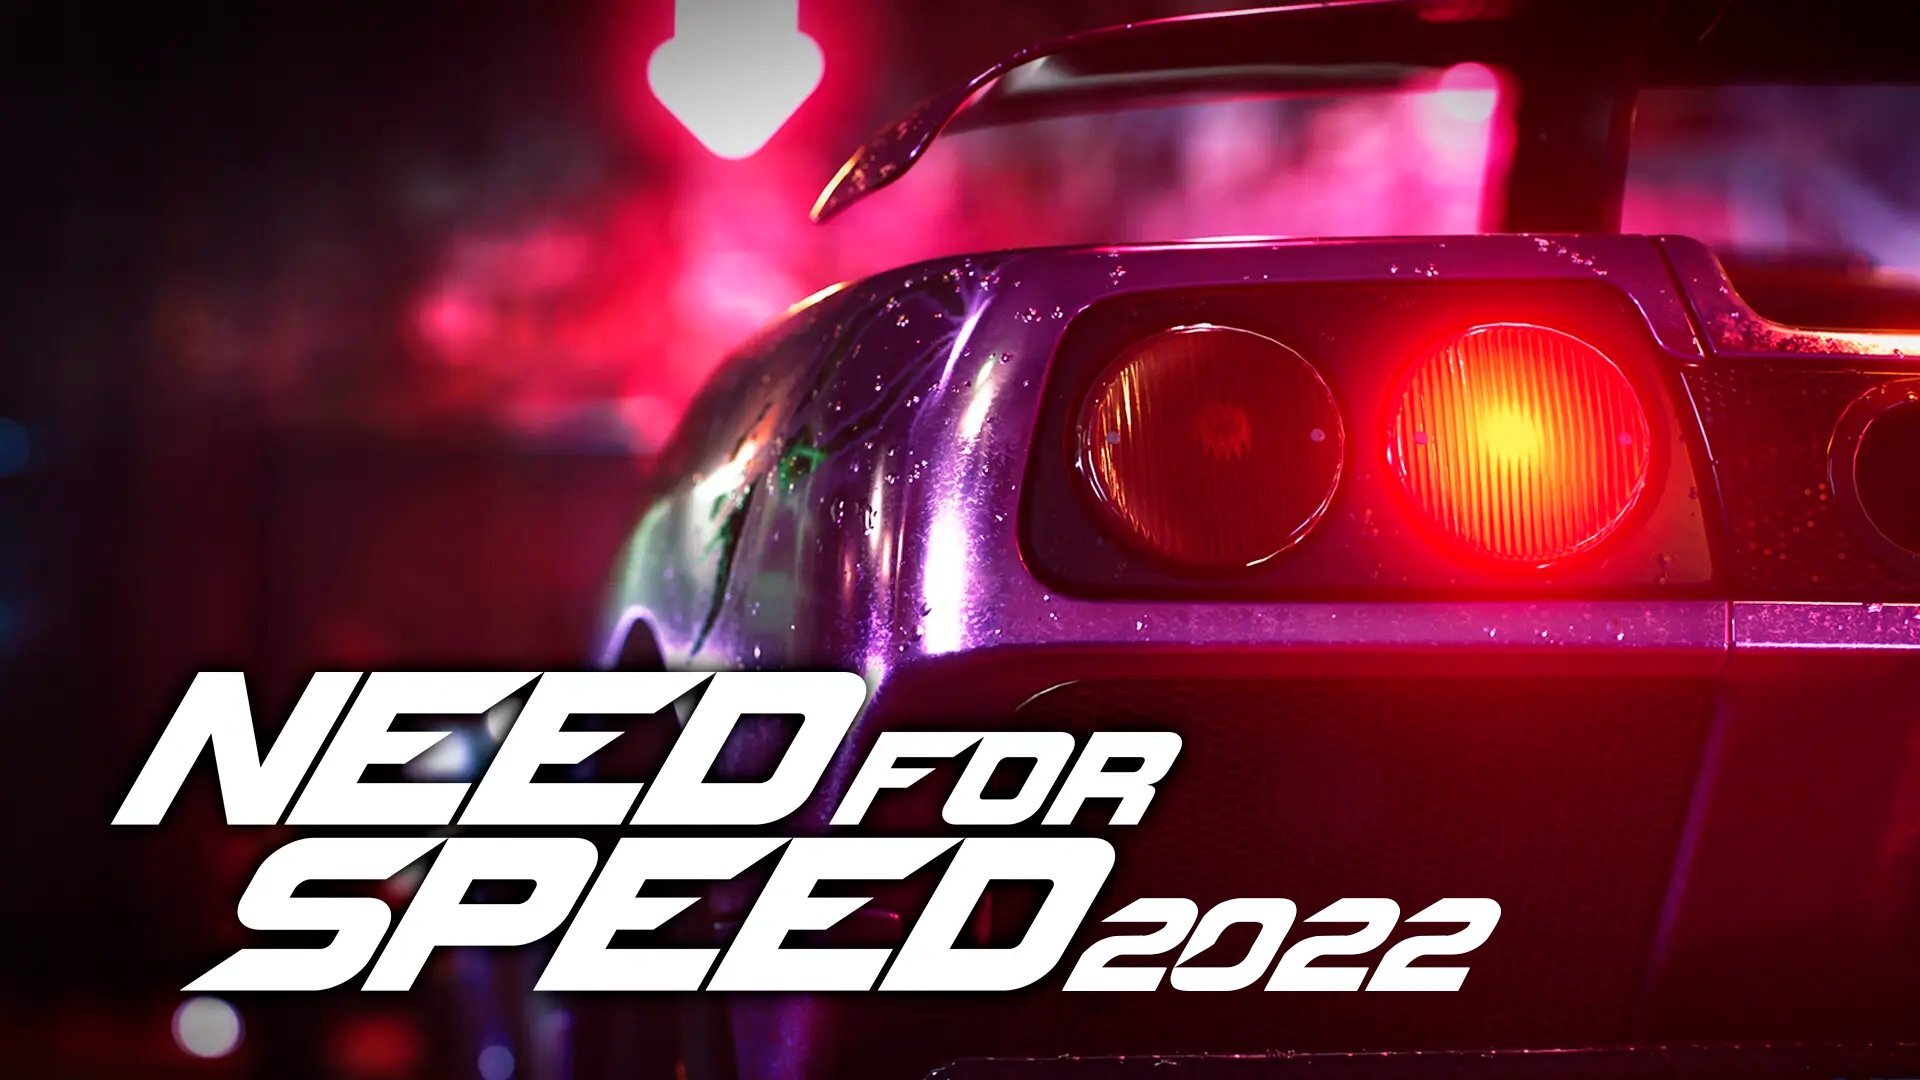 need for speed 2022 poster